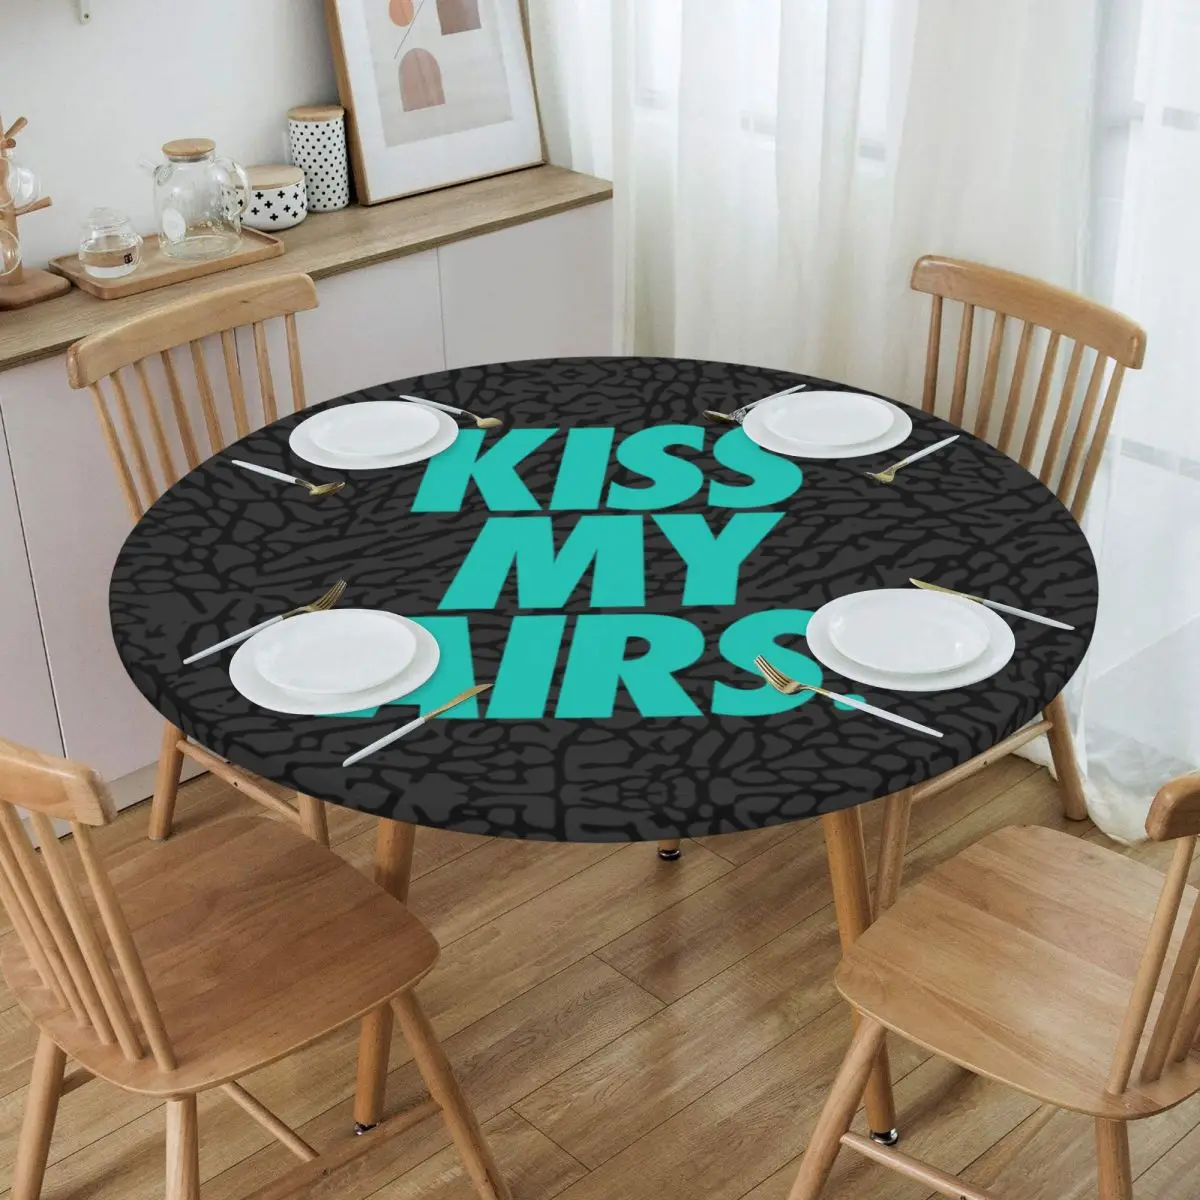 

Kiss My Airs Tablecloth Round Elastic Fitted Waterproof Table Cloth Cover for Dining Room